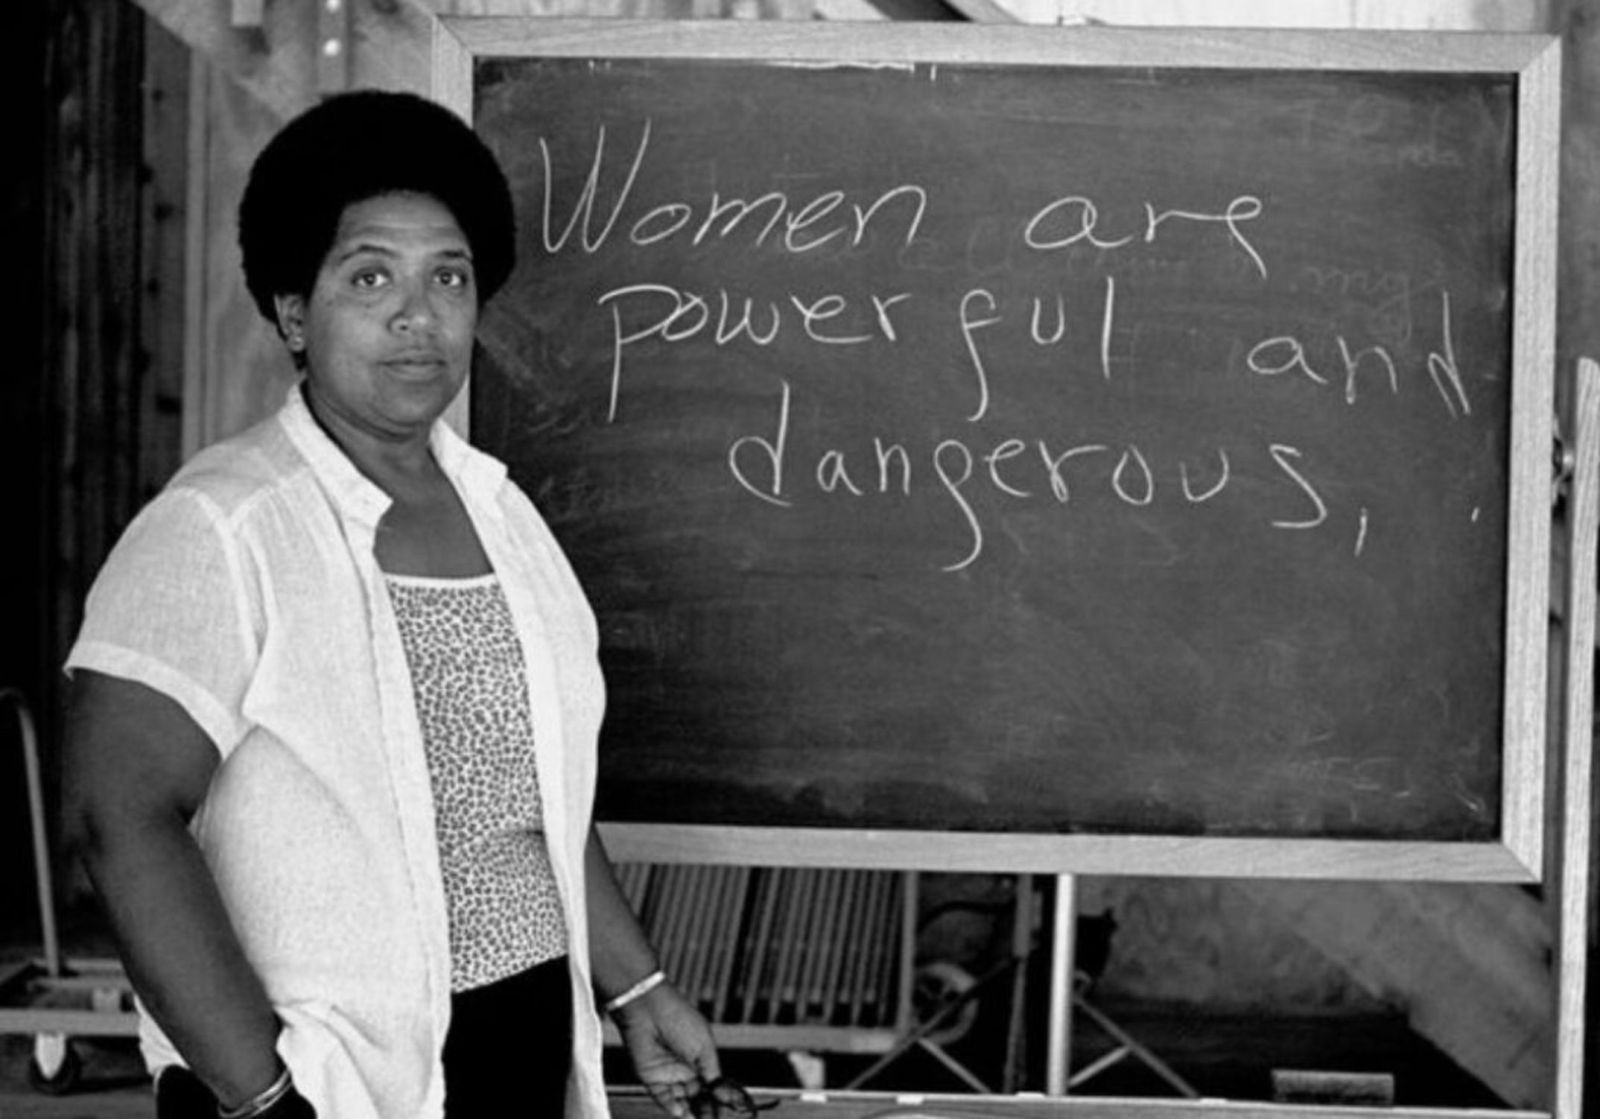 Audre Lorde.